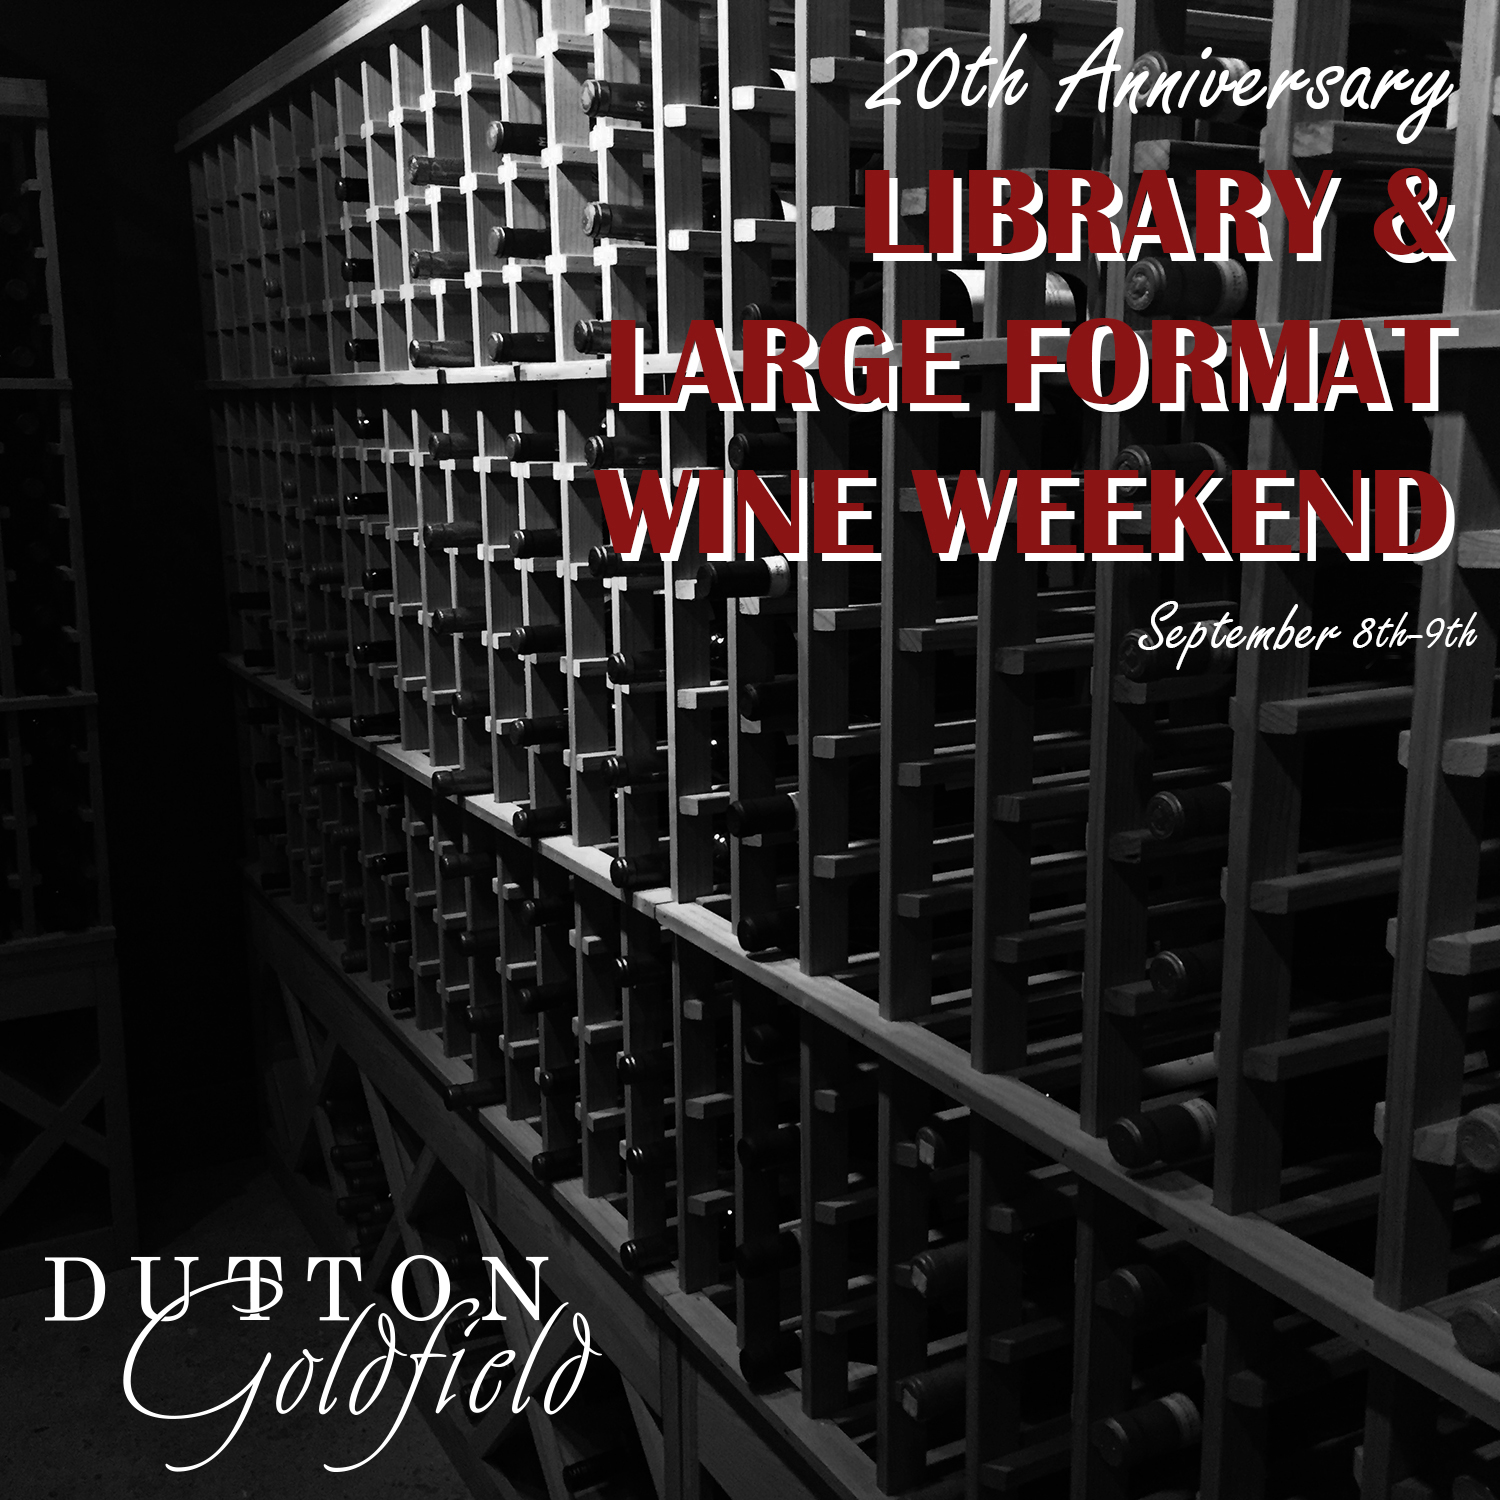 Library Wine Weekend at Dutton Goldfield